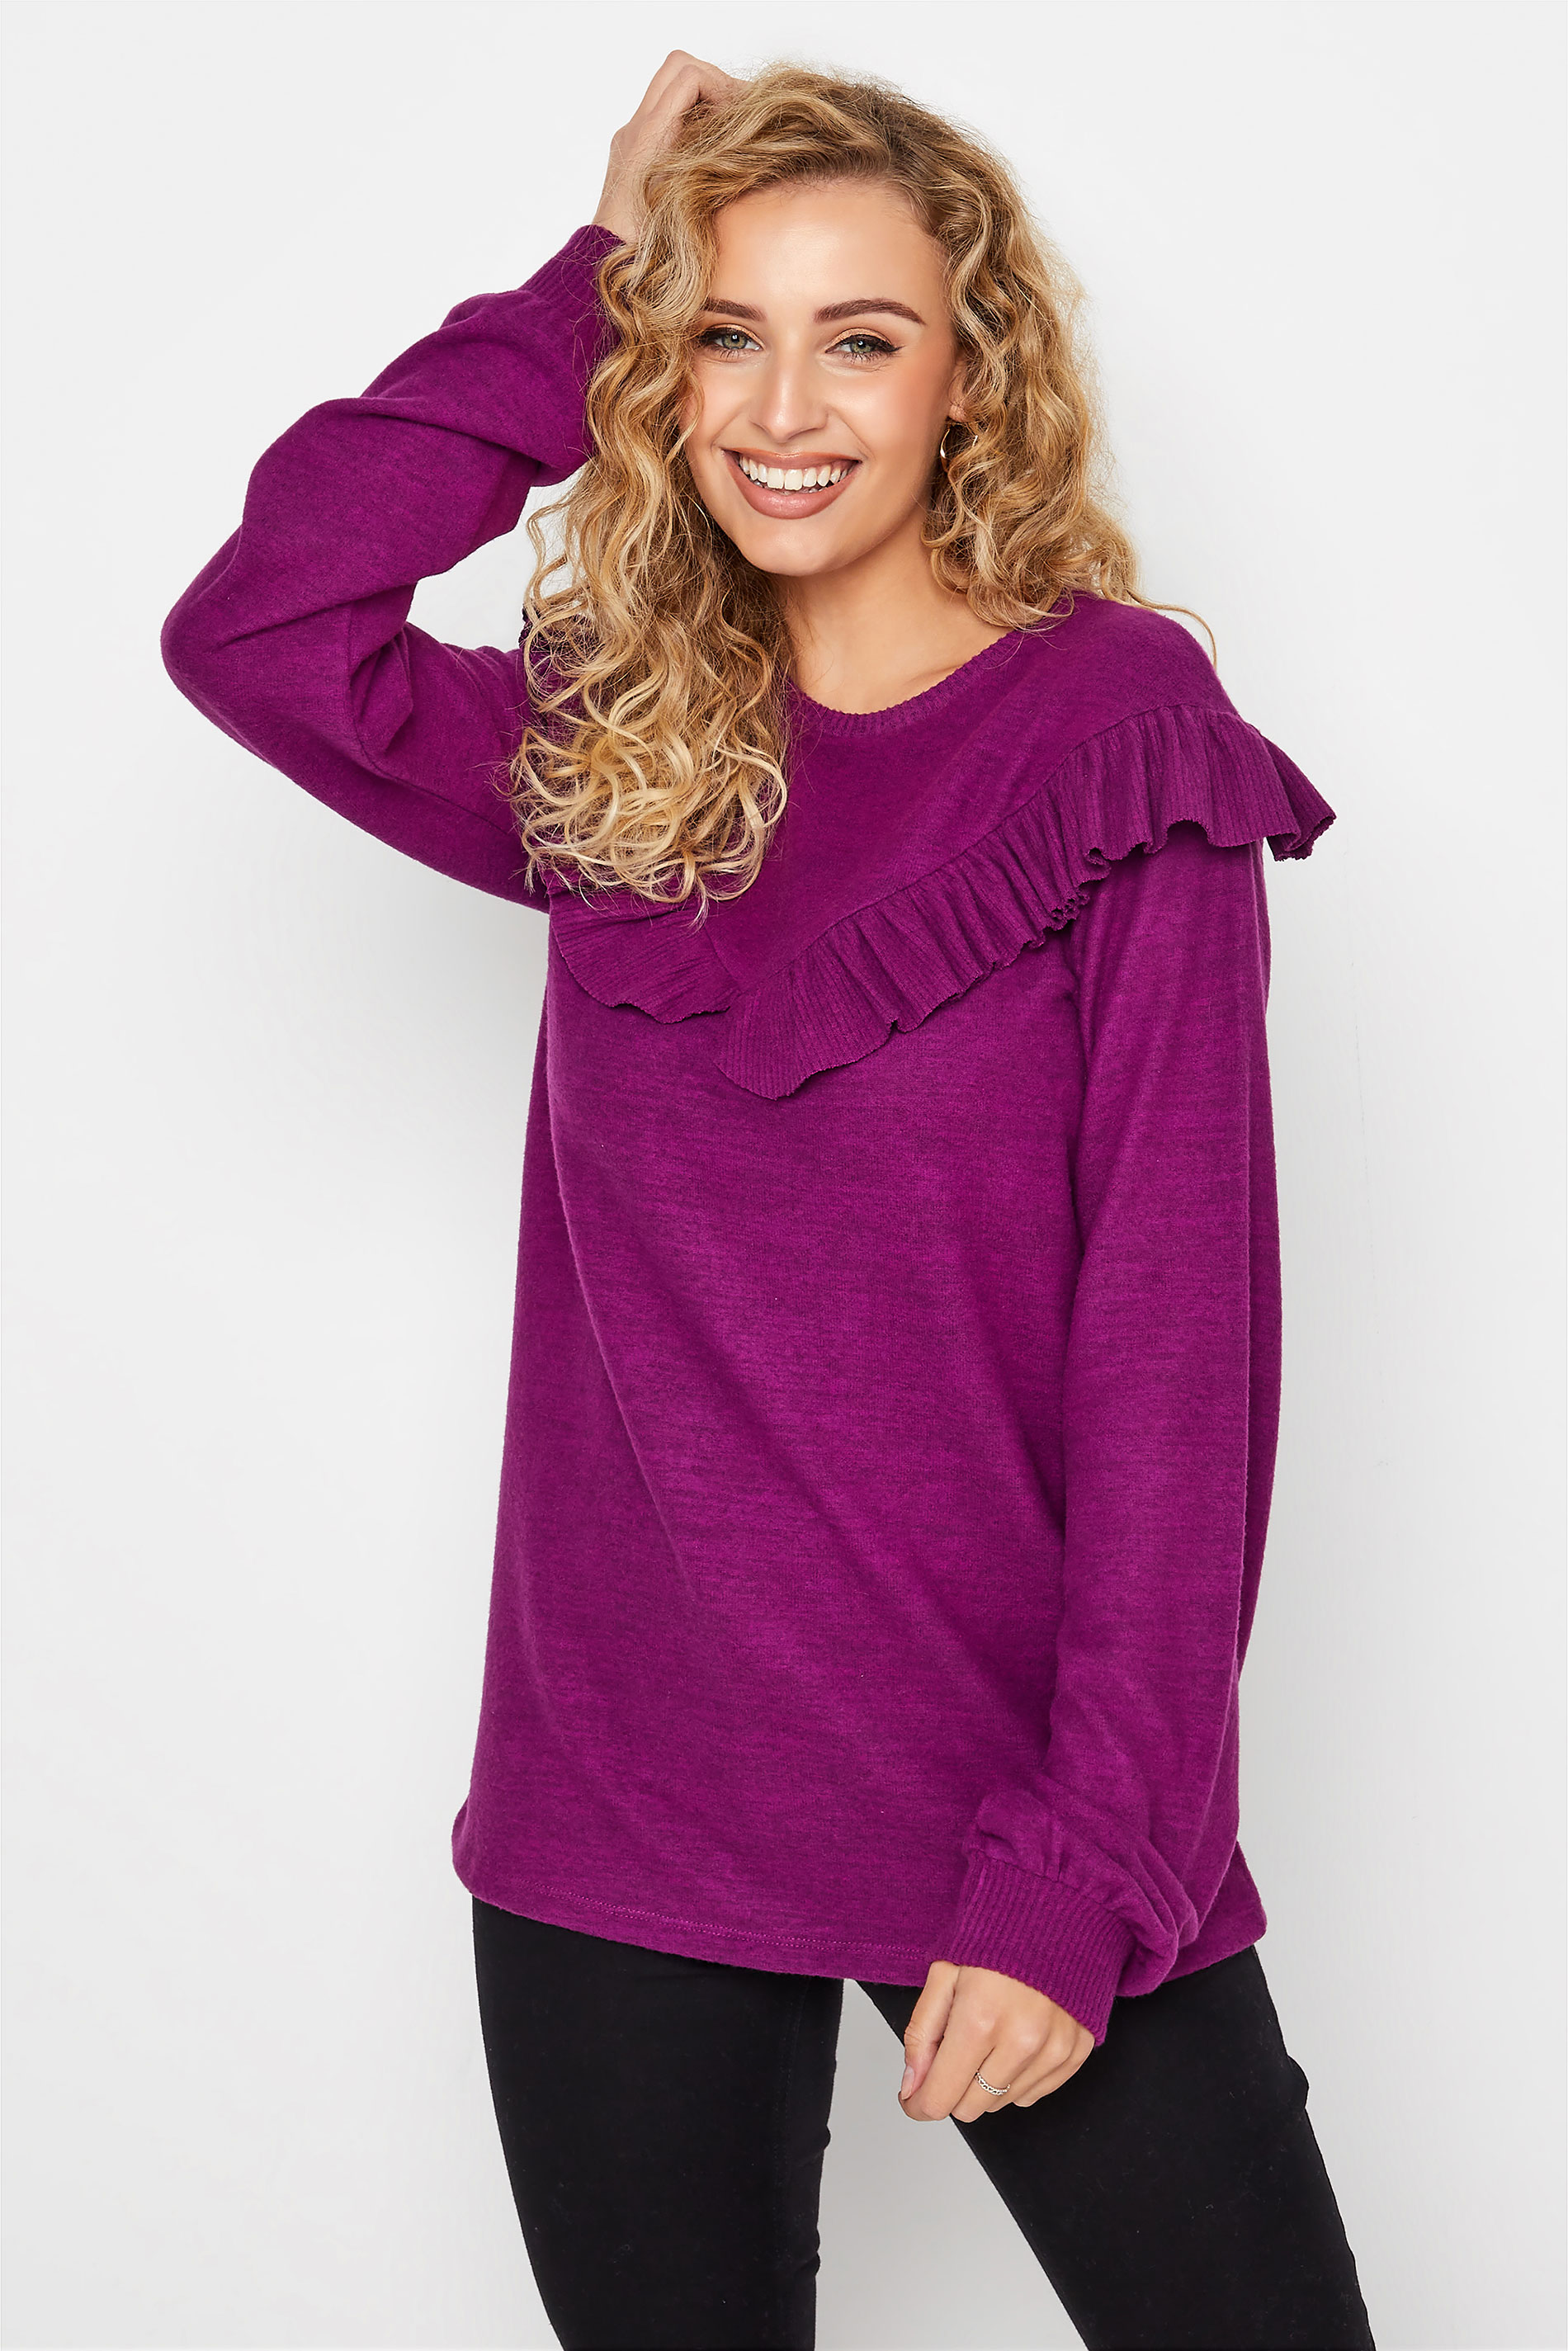 LTS Tall Purple Soft Touch Frill Top 1